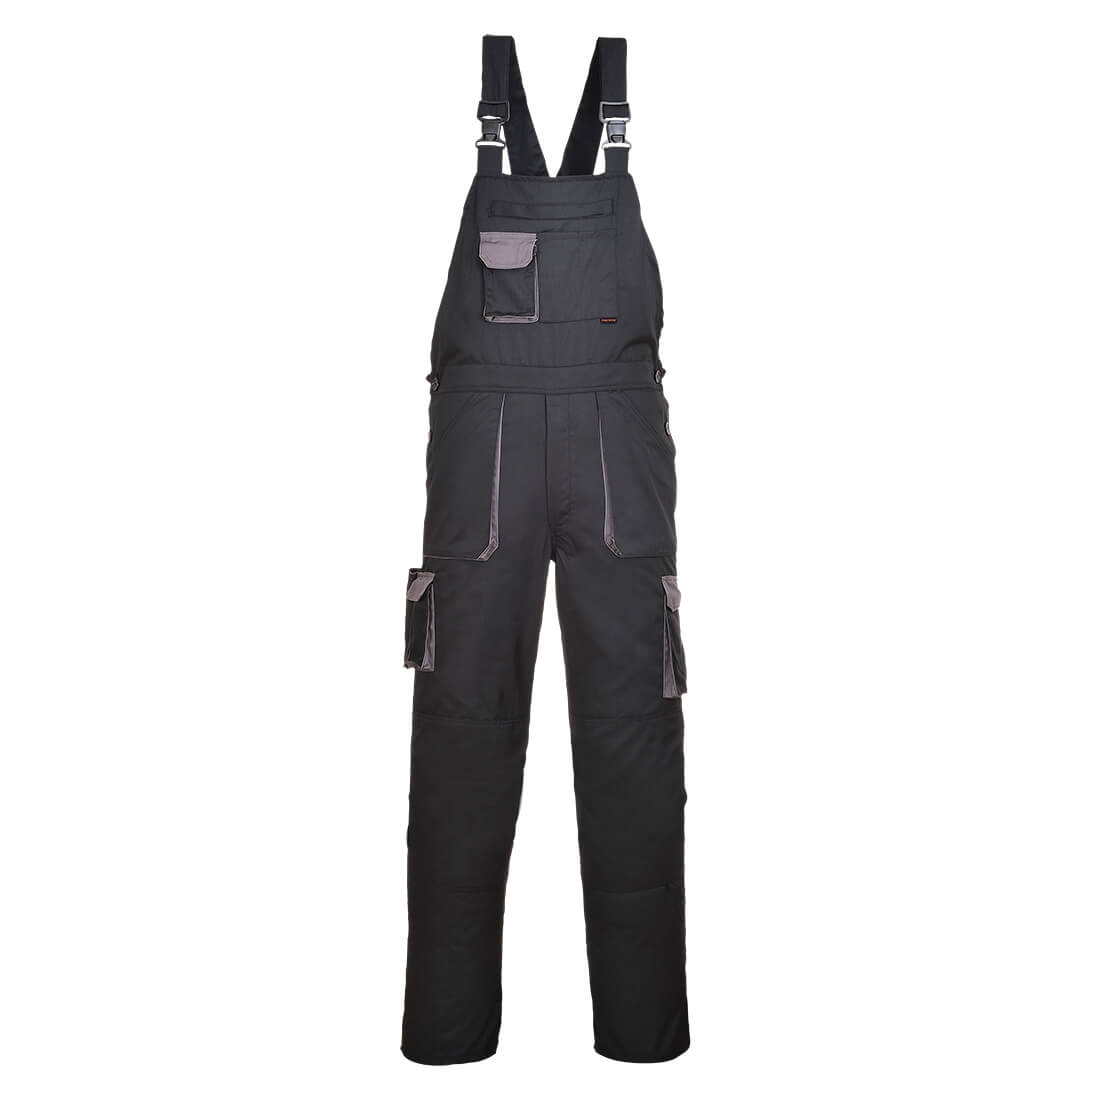 Portwest Texo Coverall Tx15 Contrast Black Grey Navy Size Men Various Overalls 